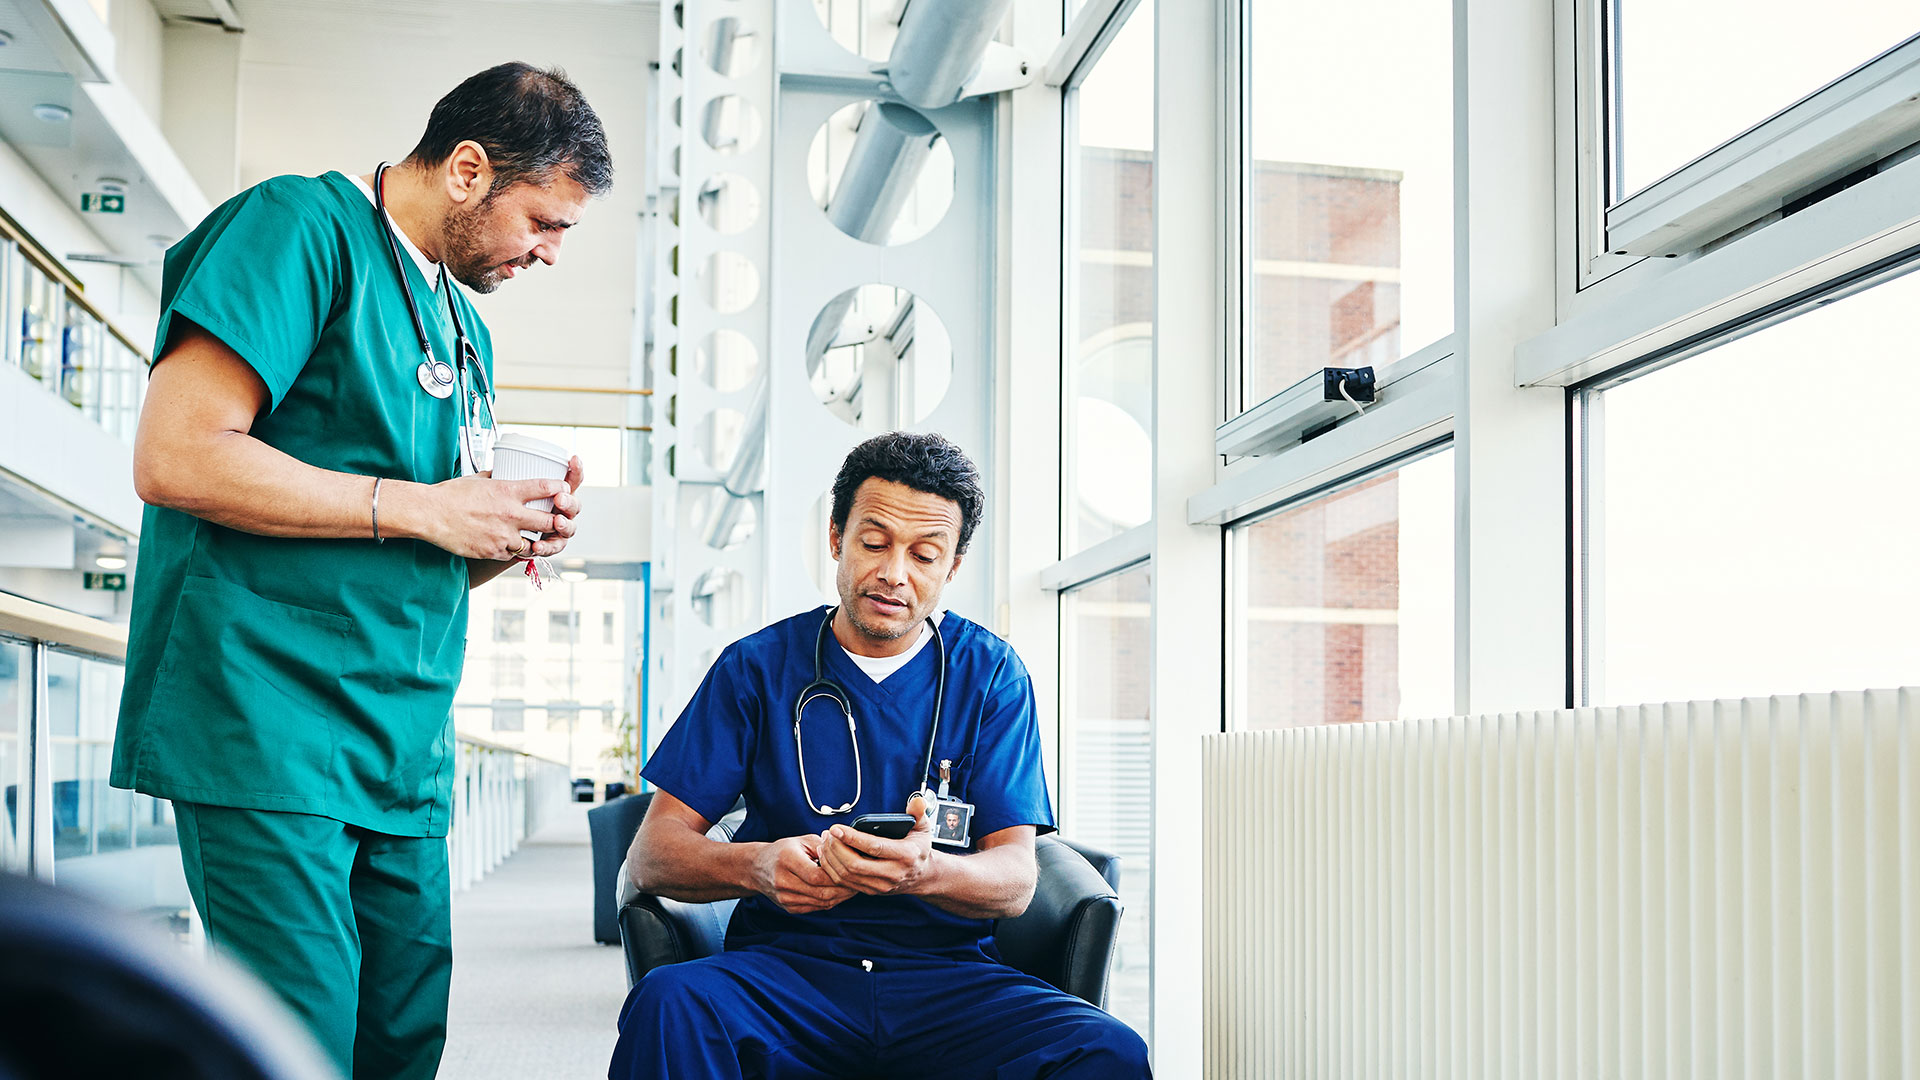 Two healthcare professionals are in a medical facility. One, standing, wears green scrubs while holding a coffee cup. The other, seated, wears blue scrubs and looks at a smartphone.